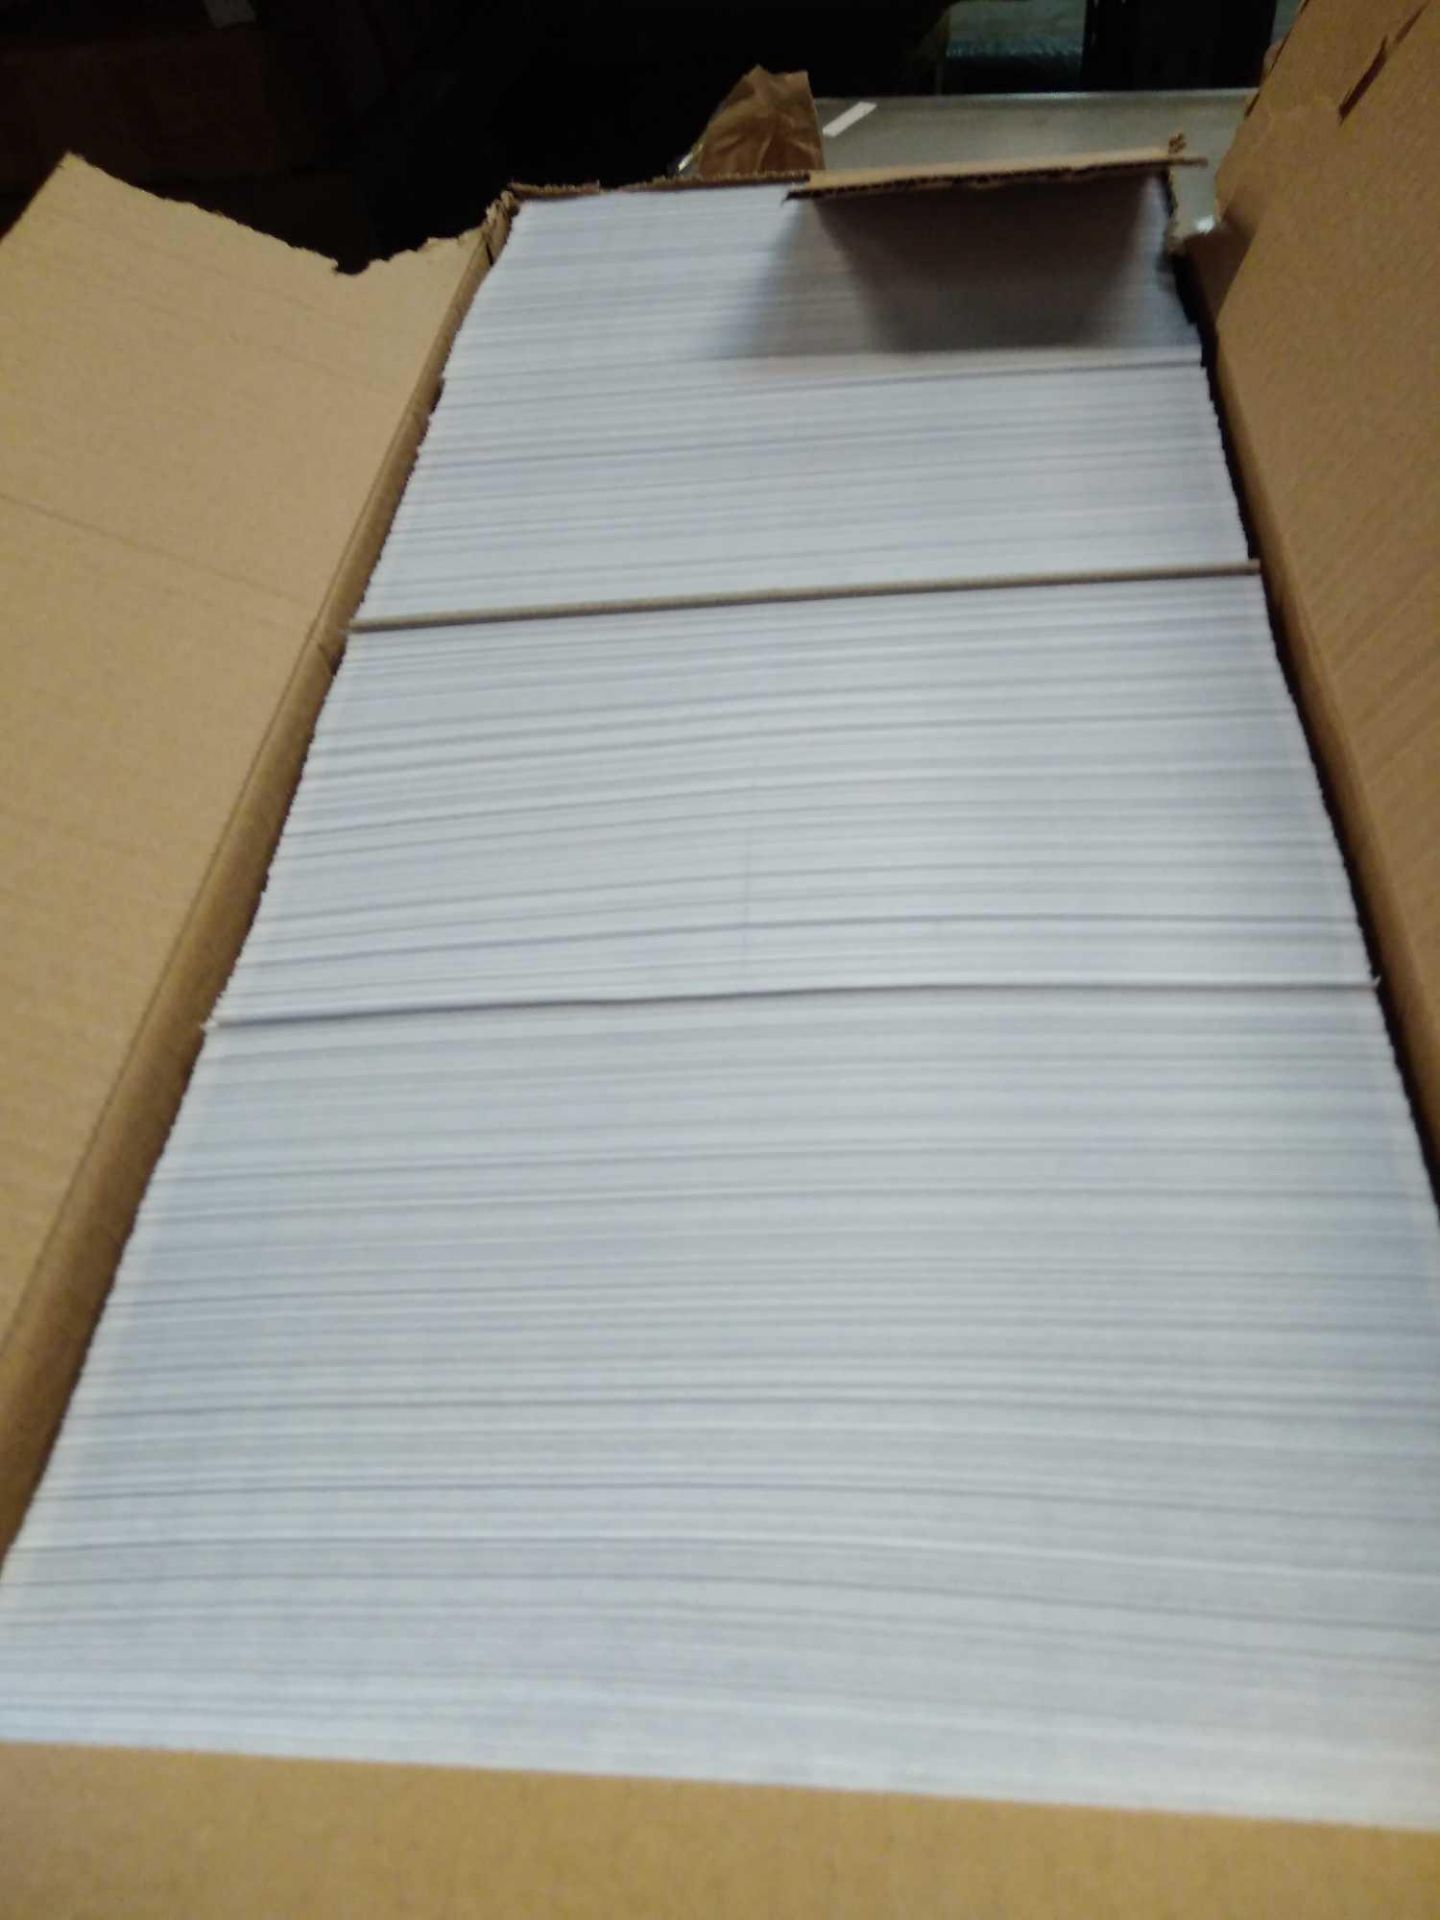 1 LOT TO CONTAIN PURELY EVERYDAY WALLET SELF SEAL WHITE DL ENVELOPES 1000 PER BOX 5000 TOTAL